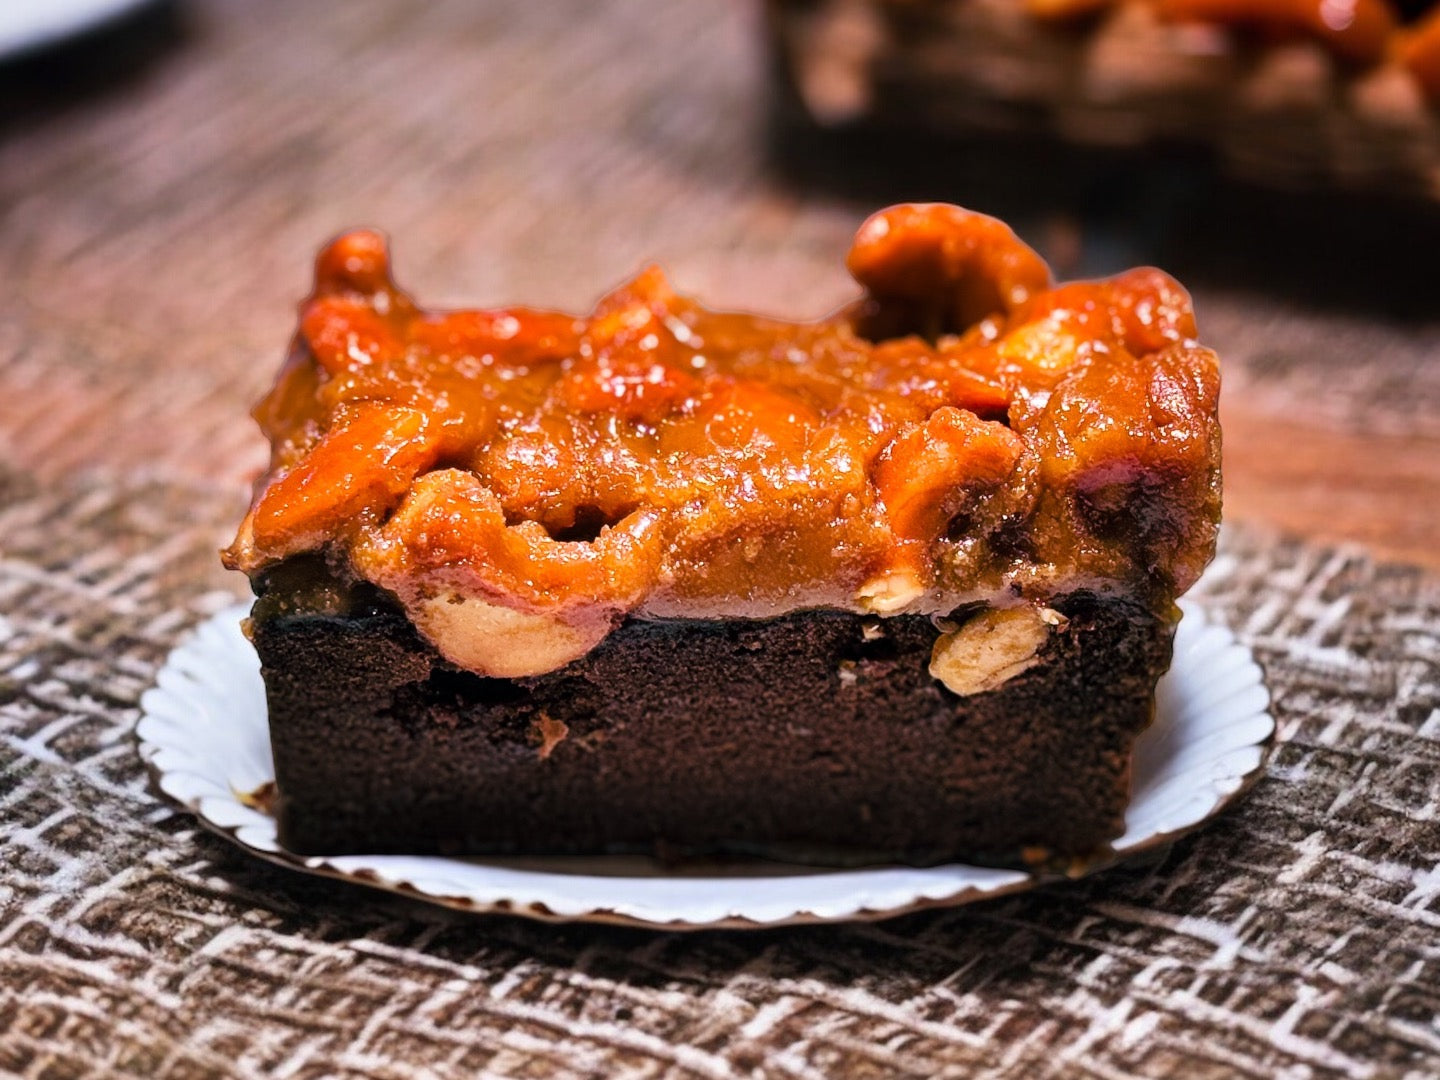 The Ugly Nutty Cake is generously topped with crunchy whole cashew nuts